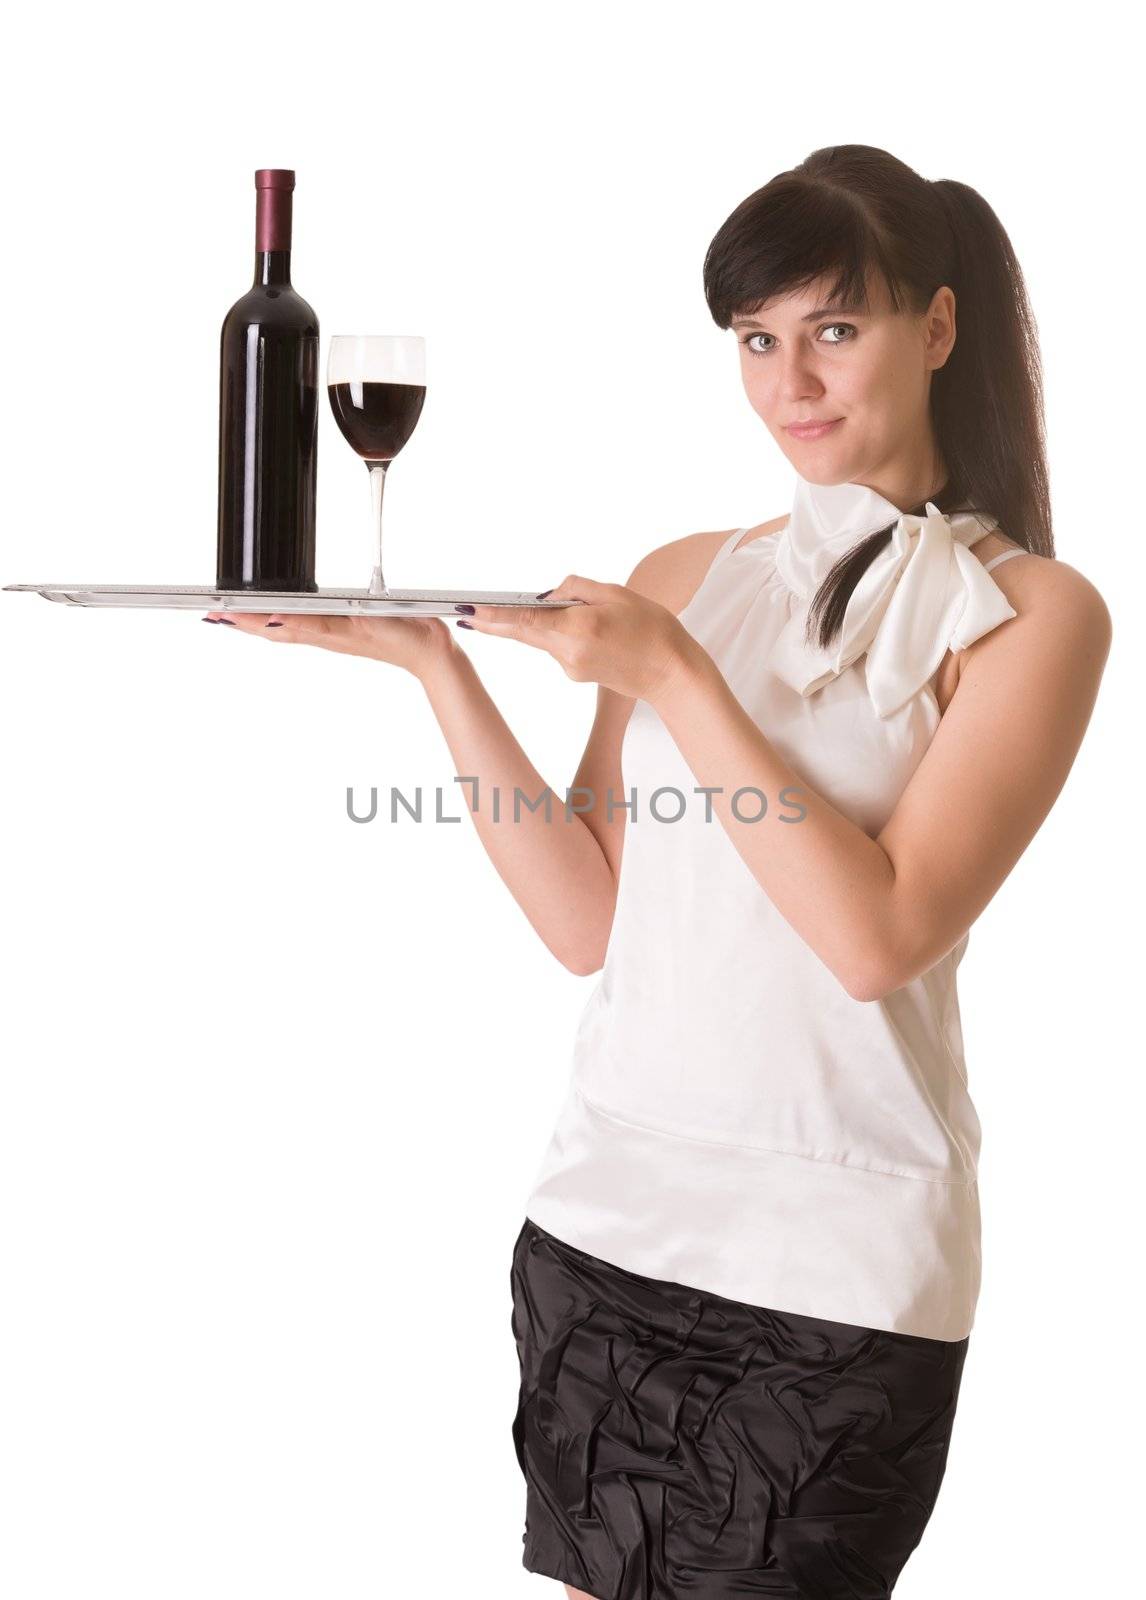 Waitress with bottle of wine and one glass on a tray, isolated on white background